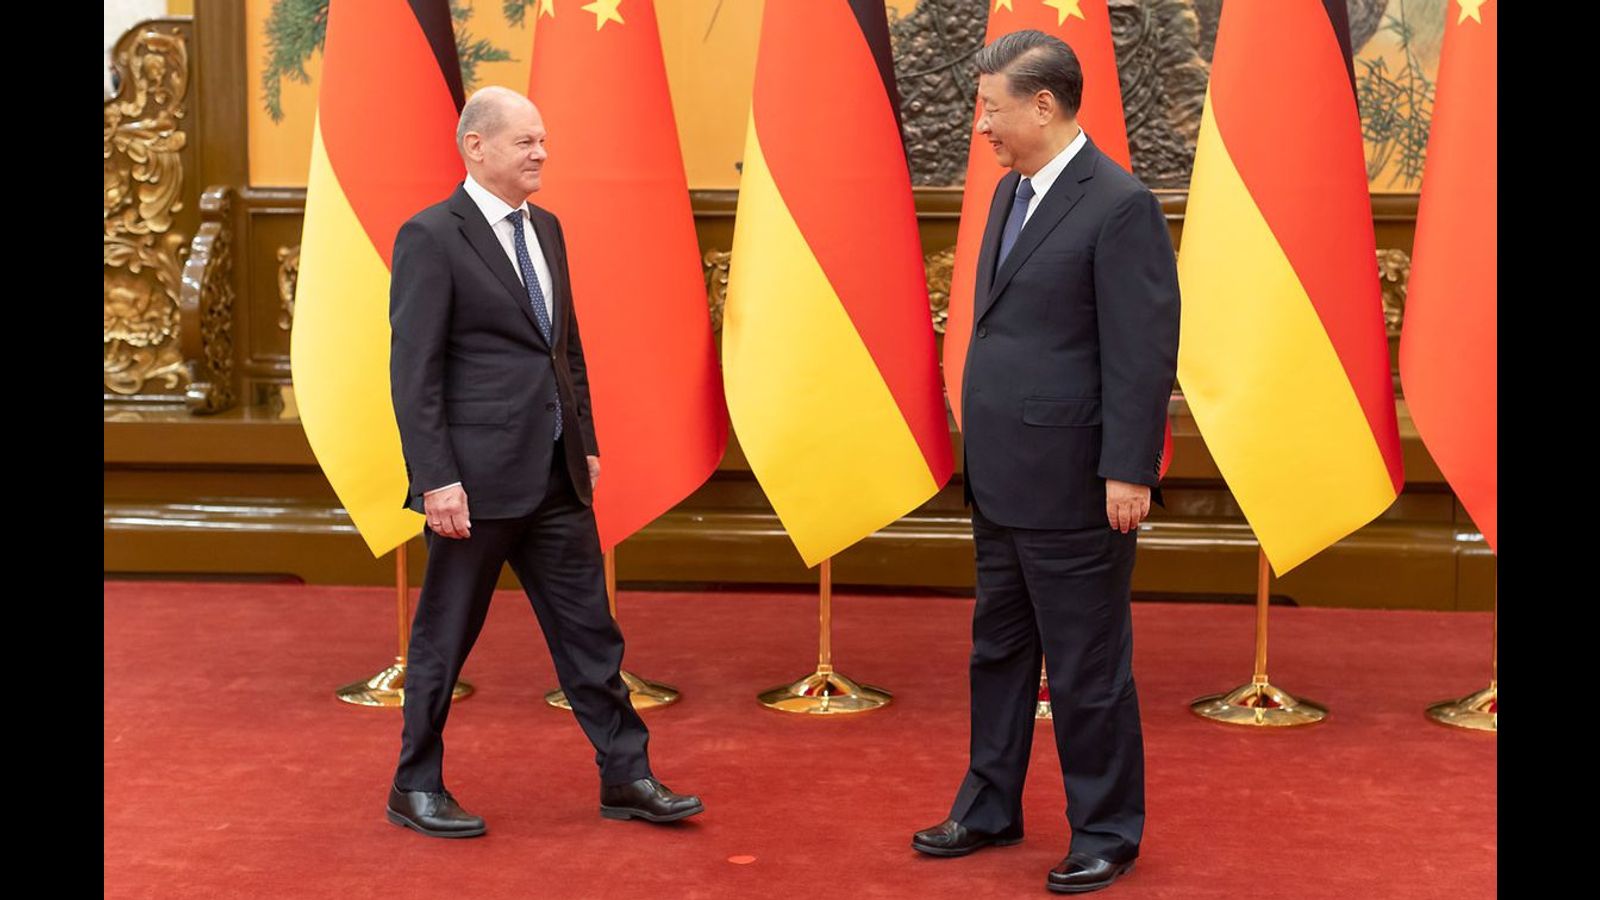 German Chancellor Scholz criticised for trip to China - World Socialist ...